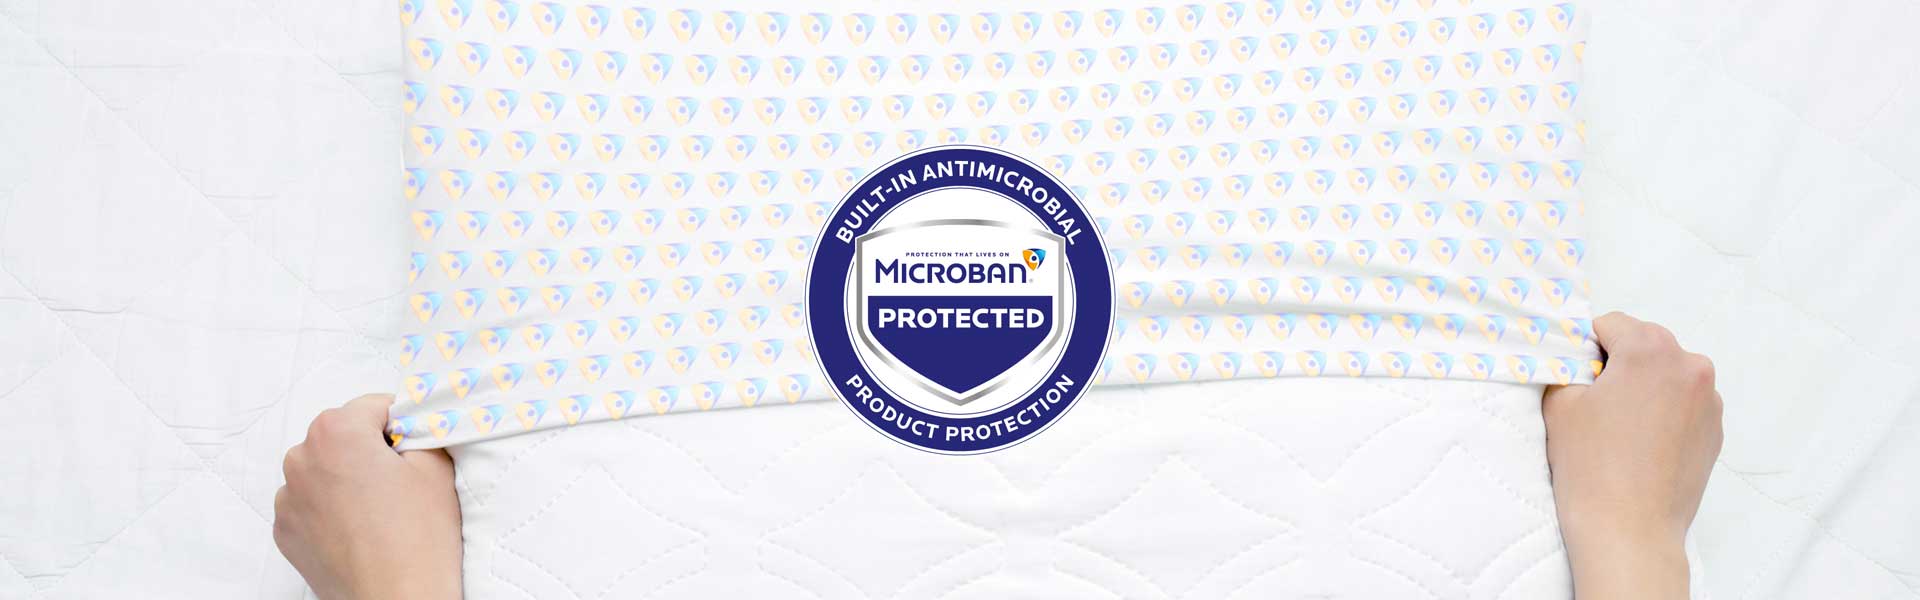 Microban protects Manchester Mills textiles